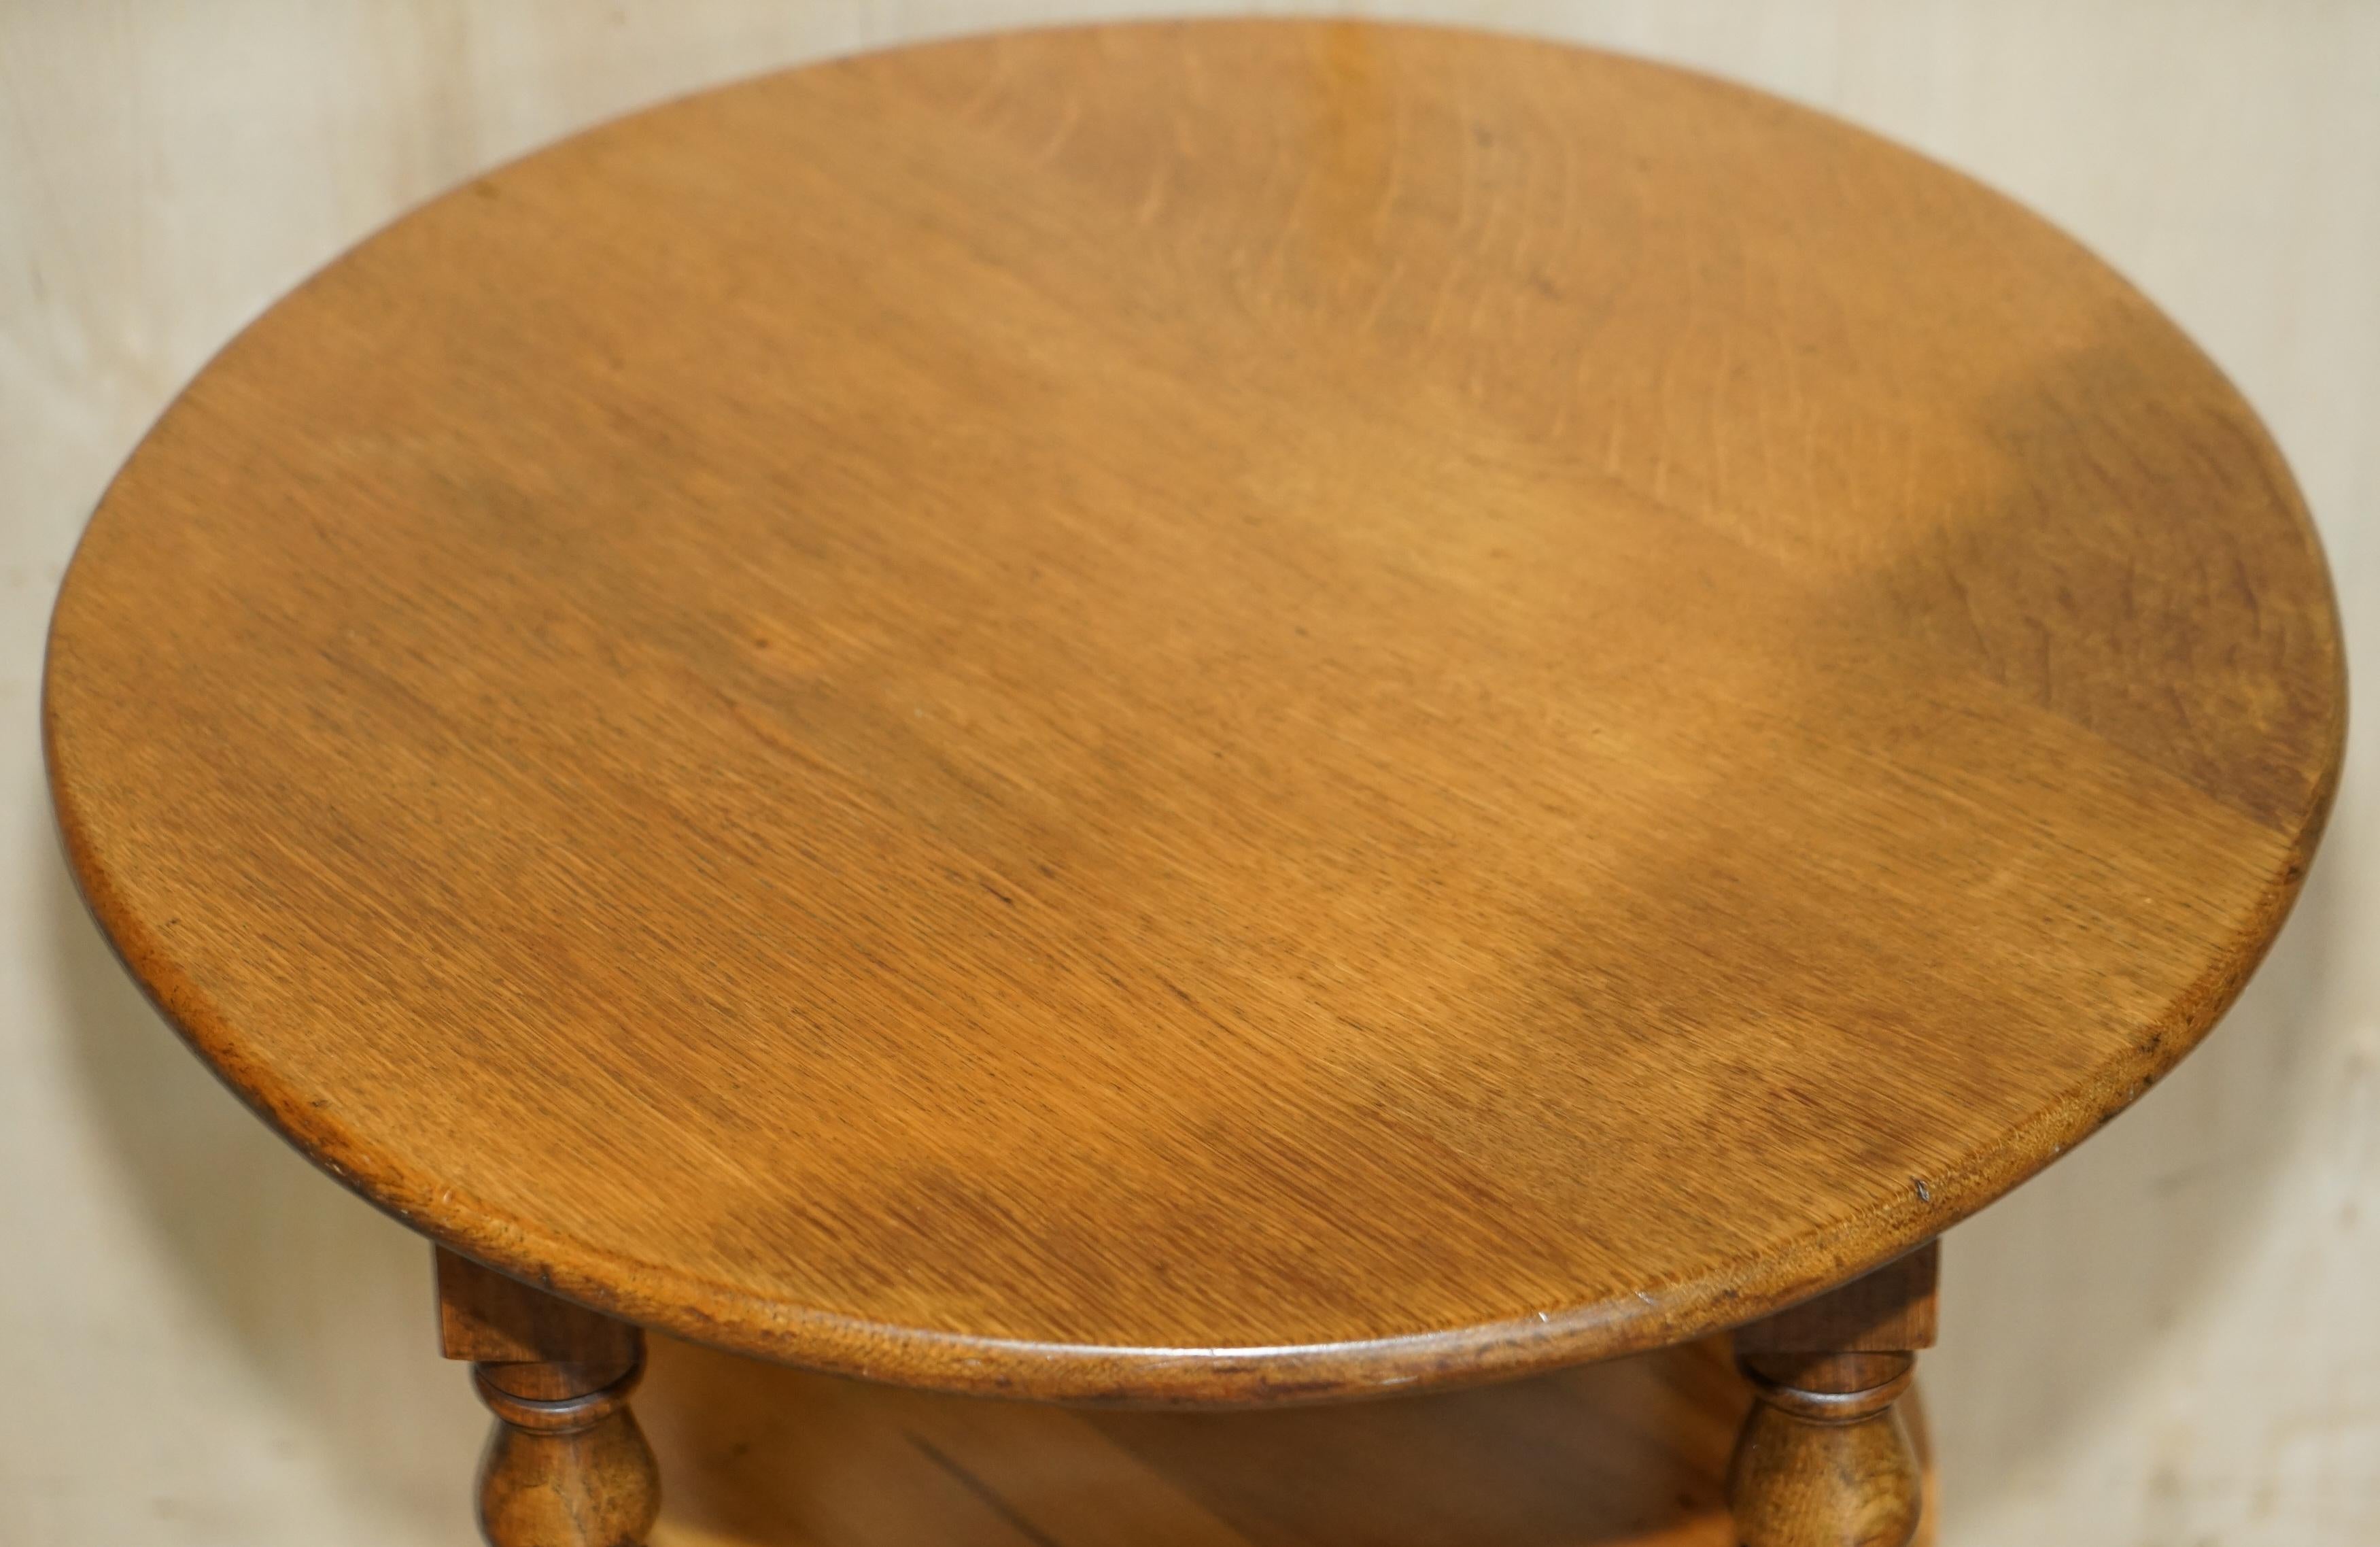 Lovely circa 1900 English Oak Side Table with Turned Legs and a Nice Rich Patina For Sale 5